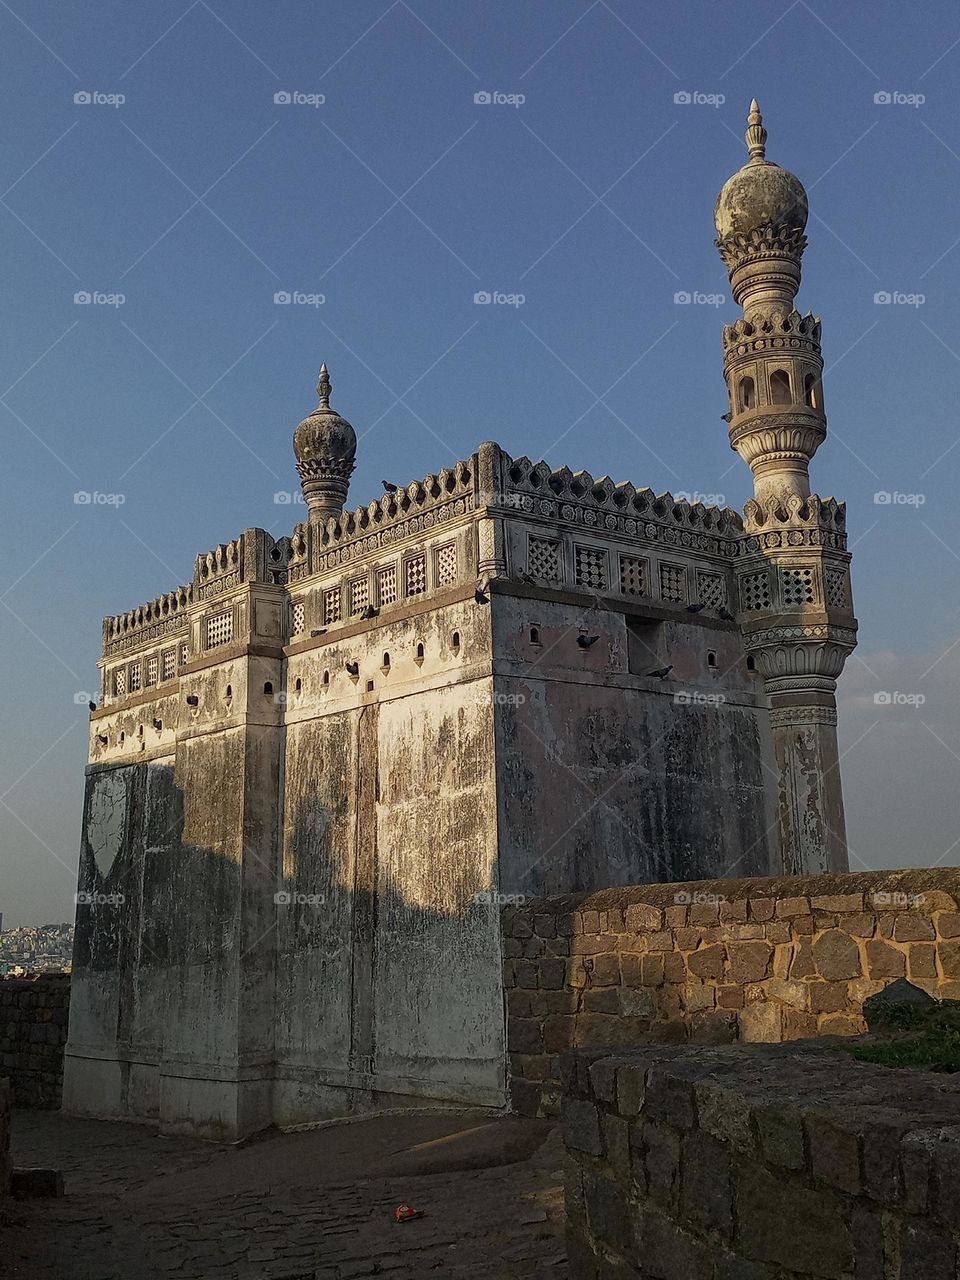 The Golconda fort in Hyderabad having this Mosque at the top of it.